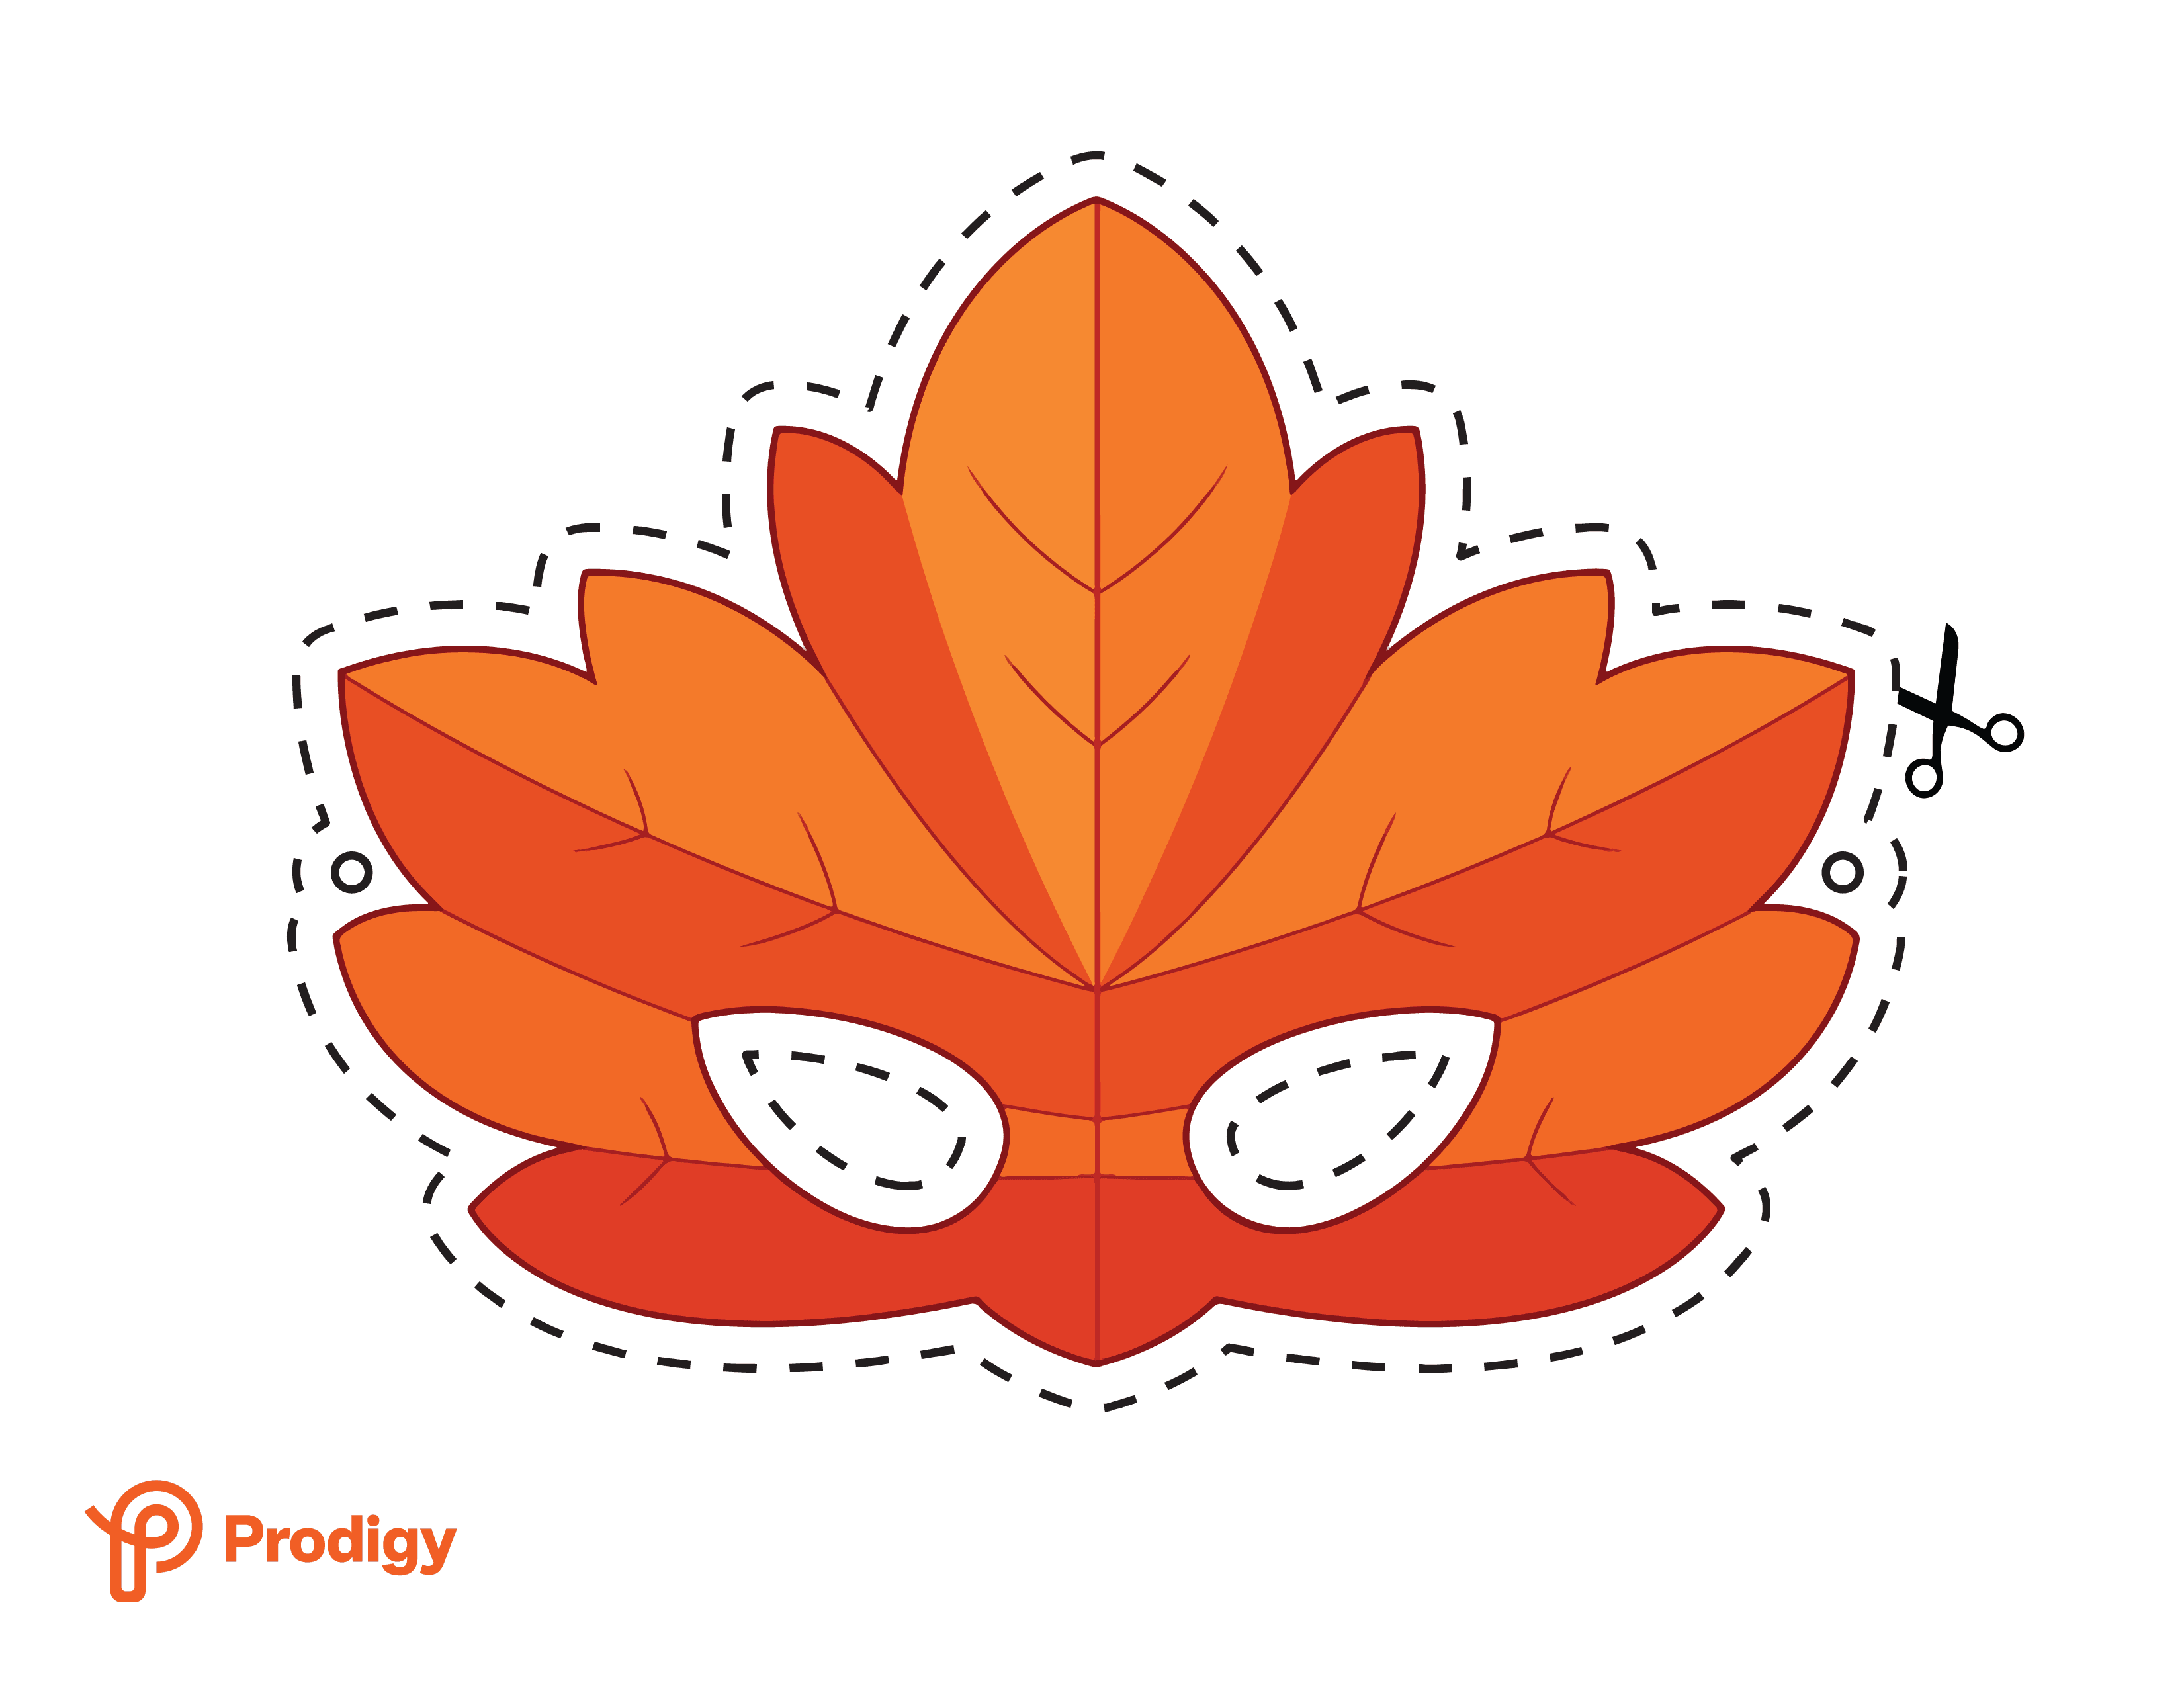 Printable Prodigy fall leaf mask in color